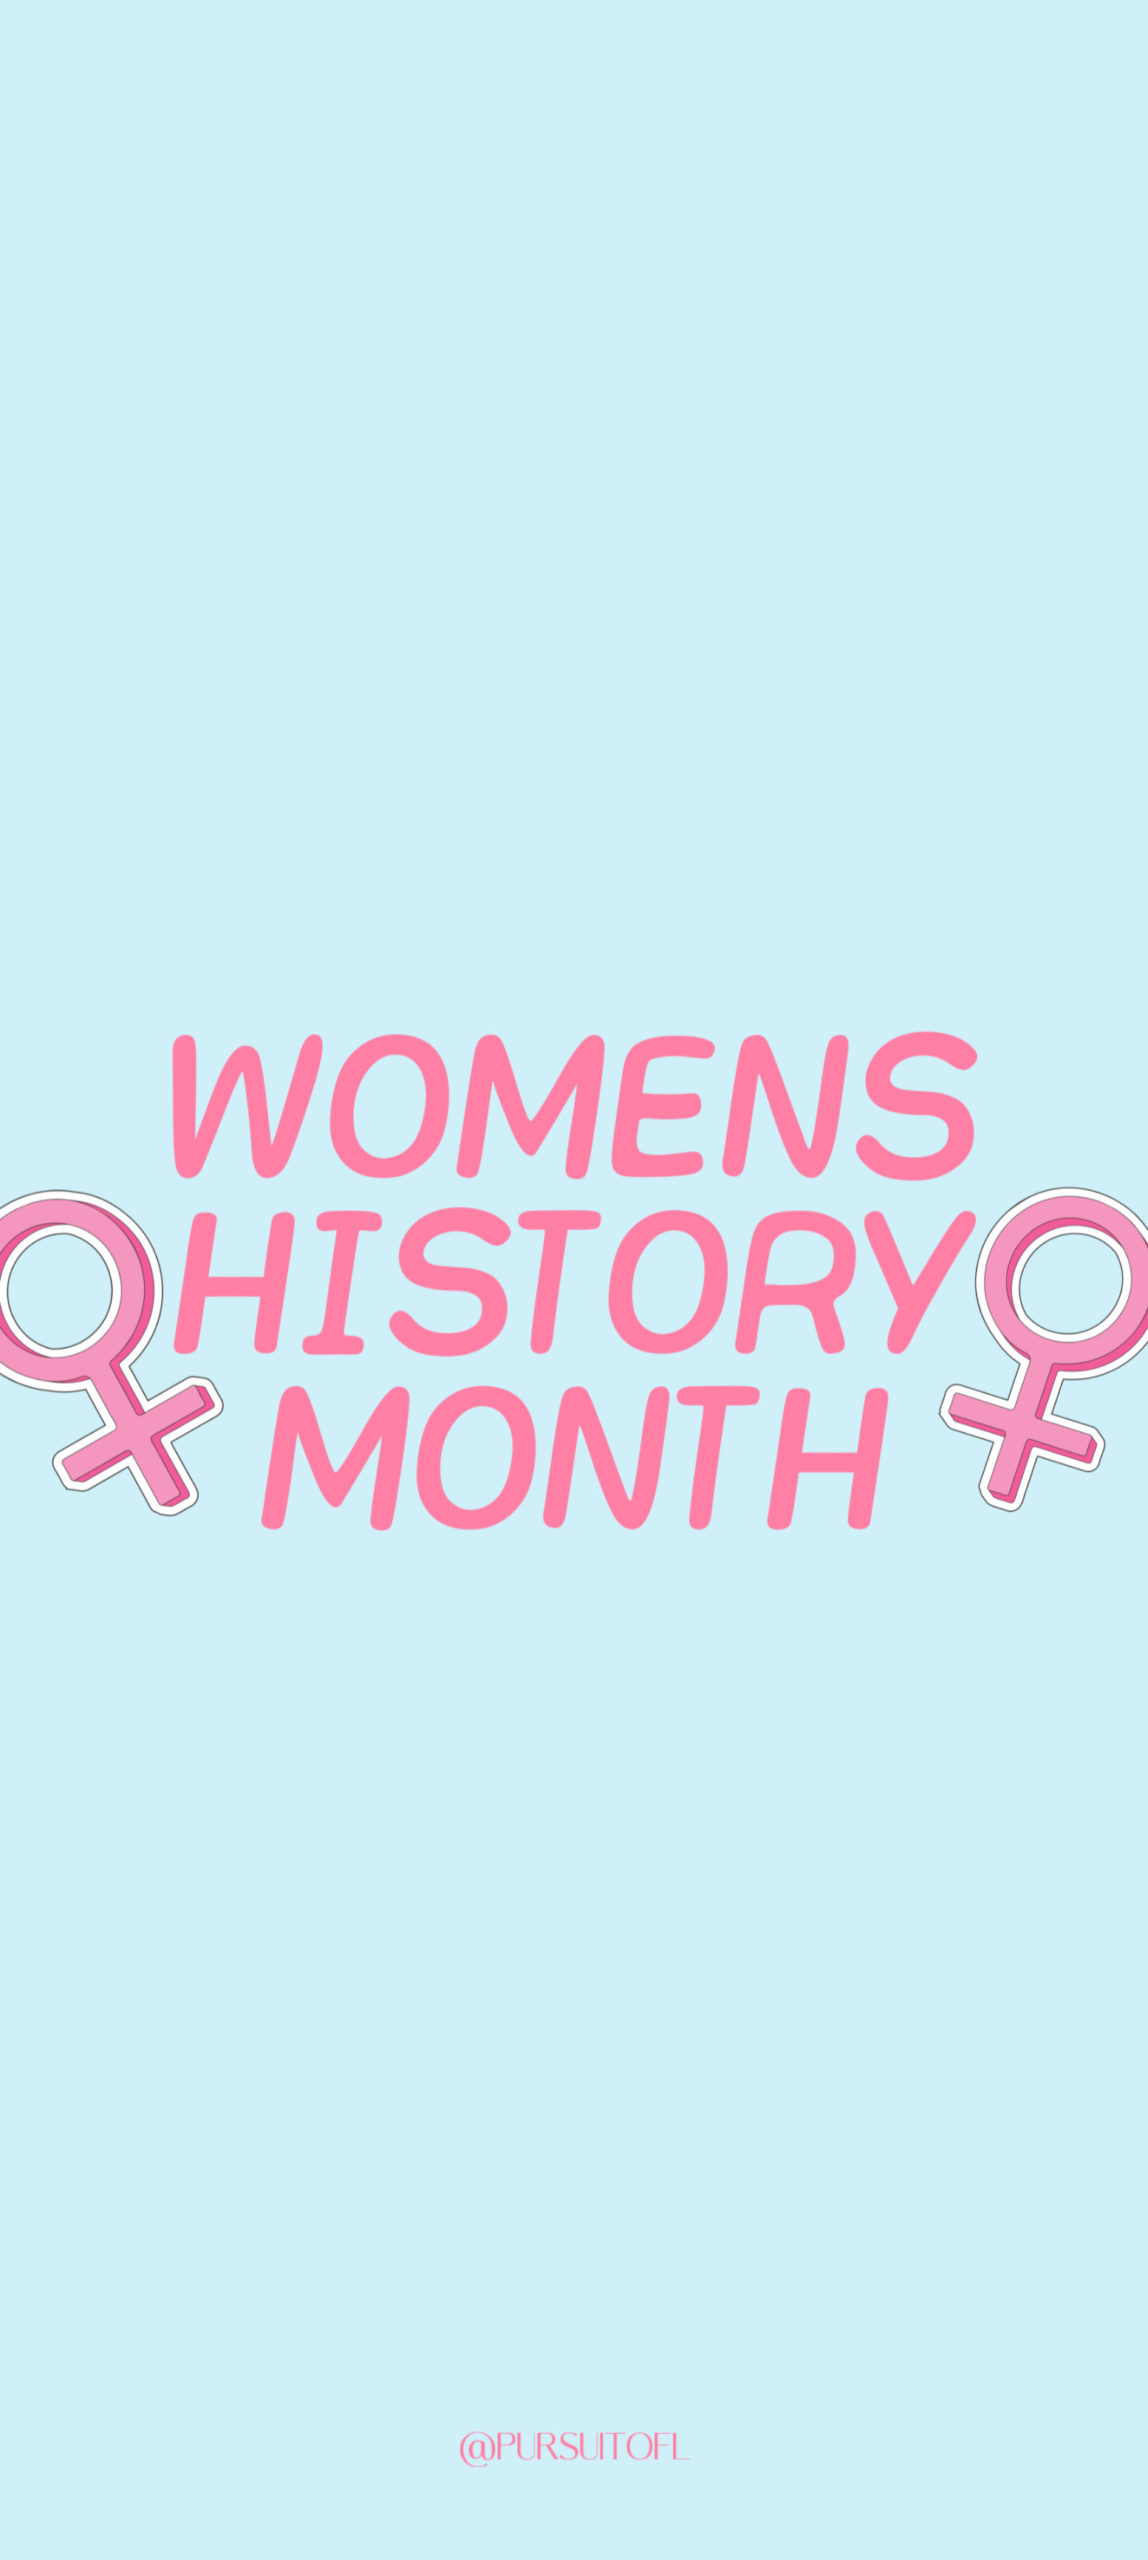 Blue phone wallpaper with women history month text